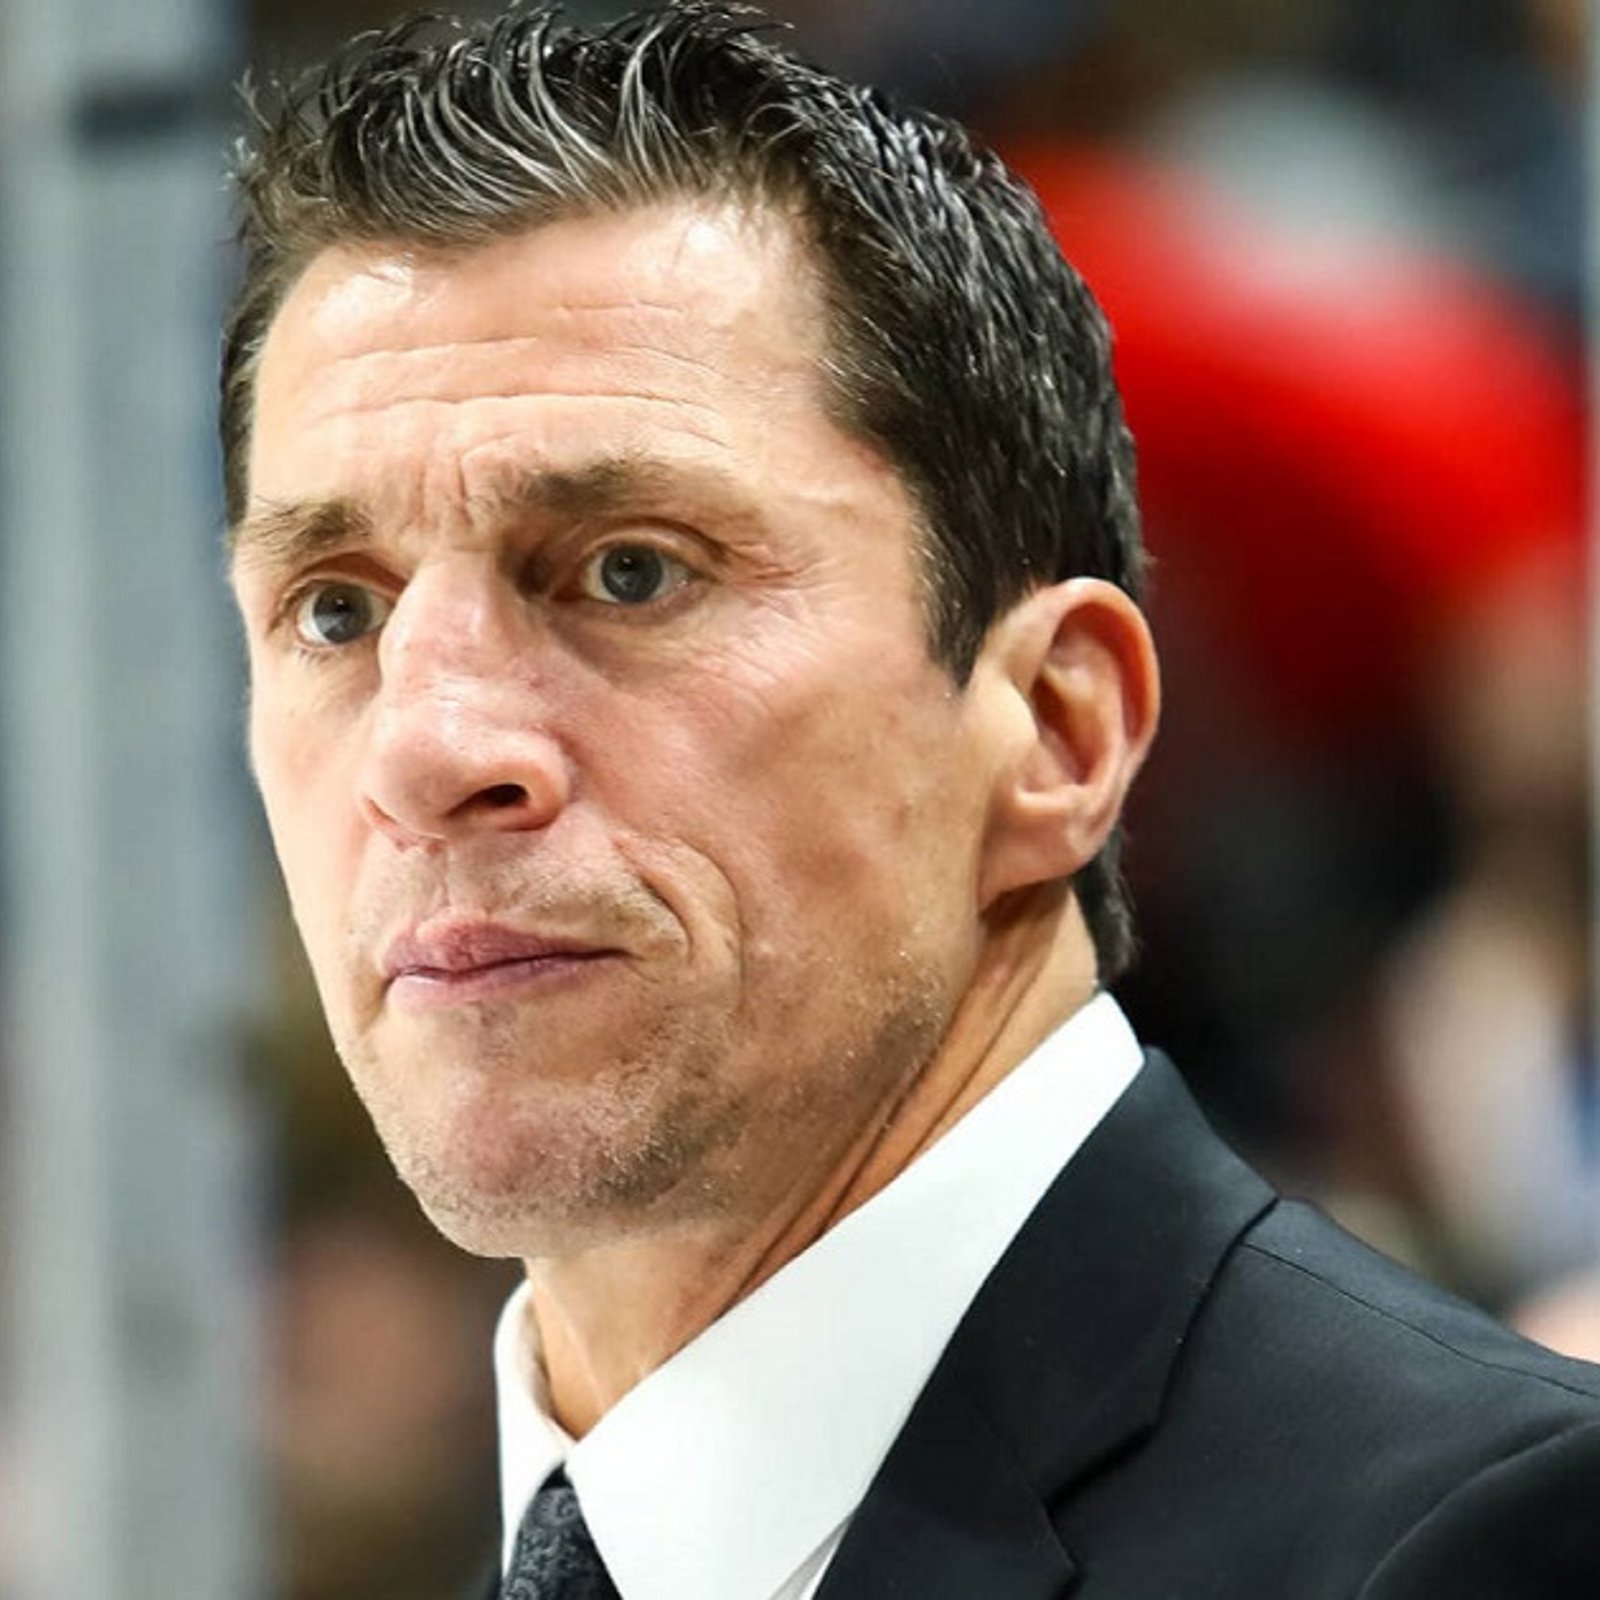 Rod Brind'Amour has made his decision.